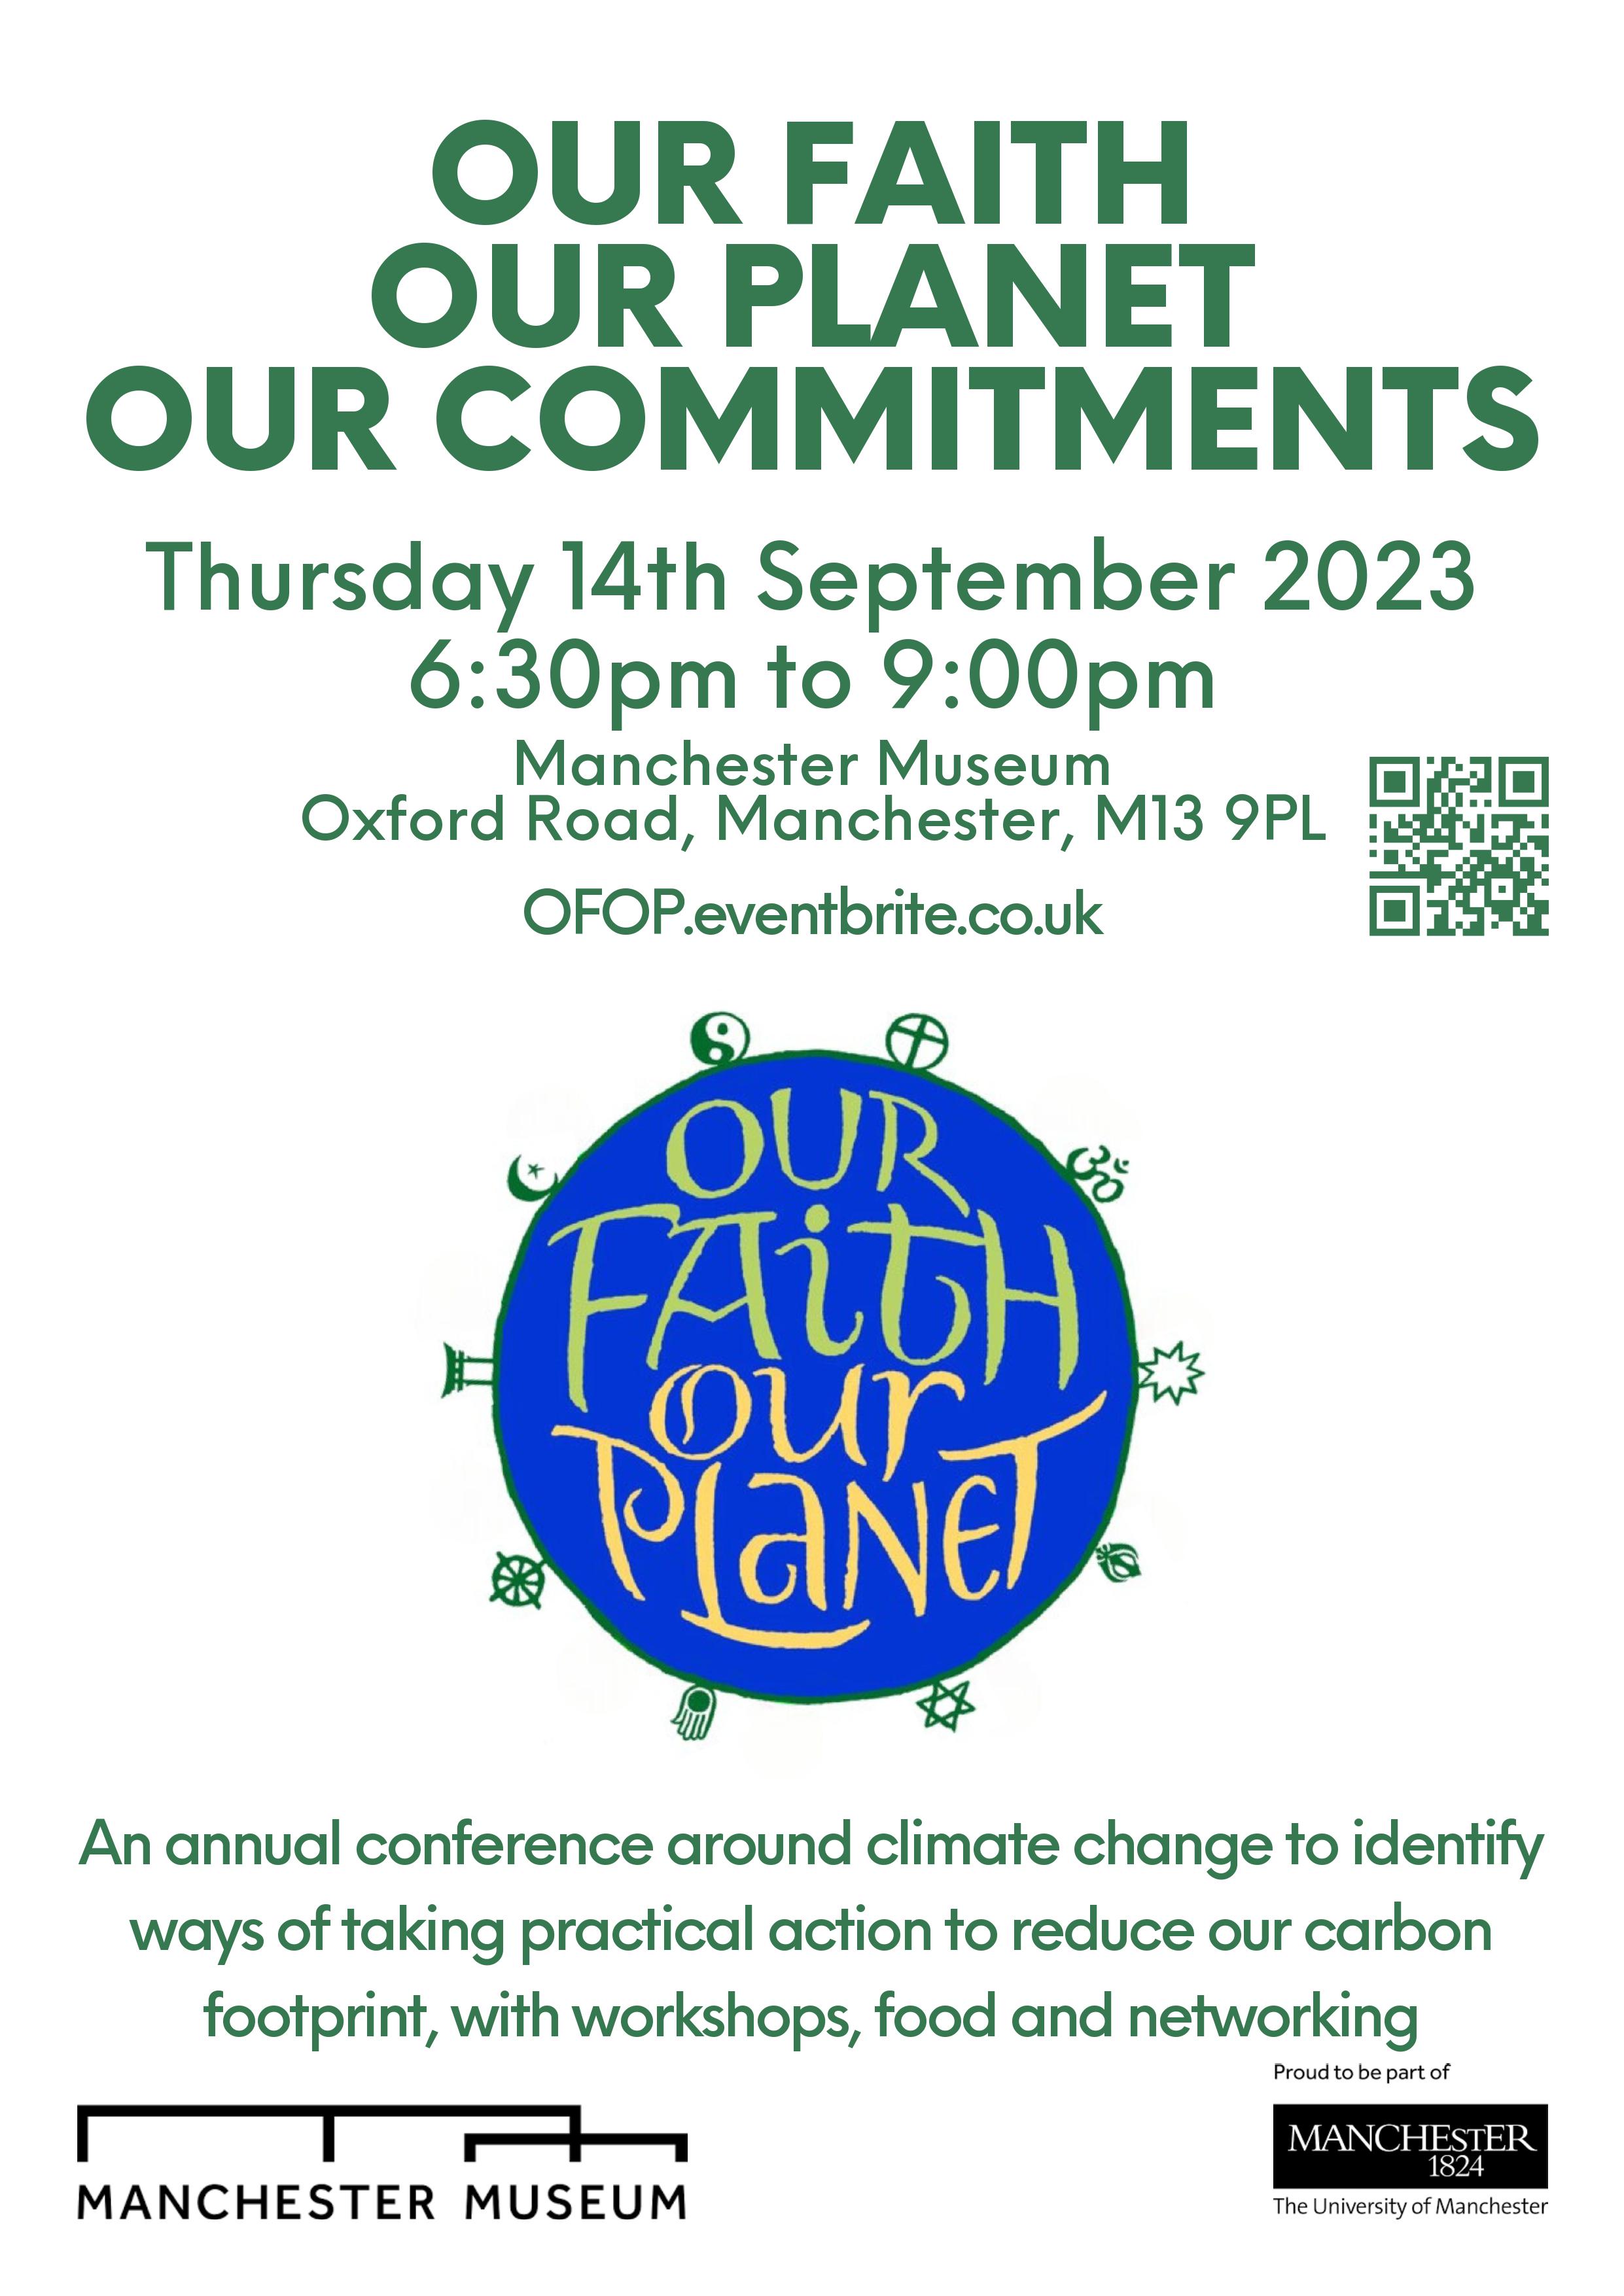 Our Faith Our Planet Our Commitments Poster. The conference is happening Thursday 14th September 2023 6.30pm-9pm at Manchester Museum. Book via: OFOP.eventbrite.co.uk